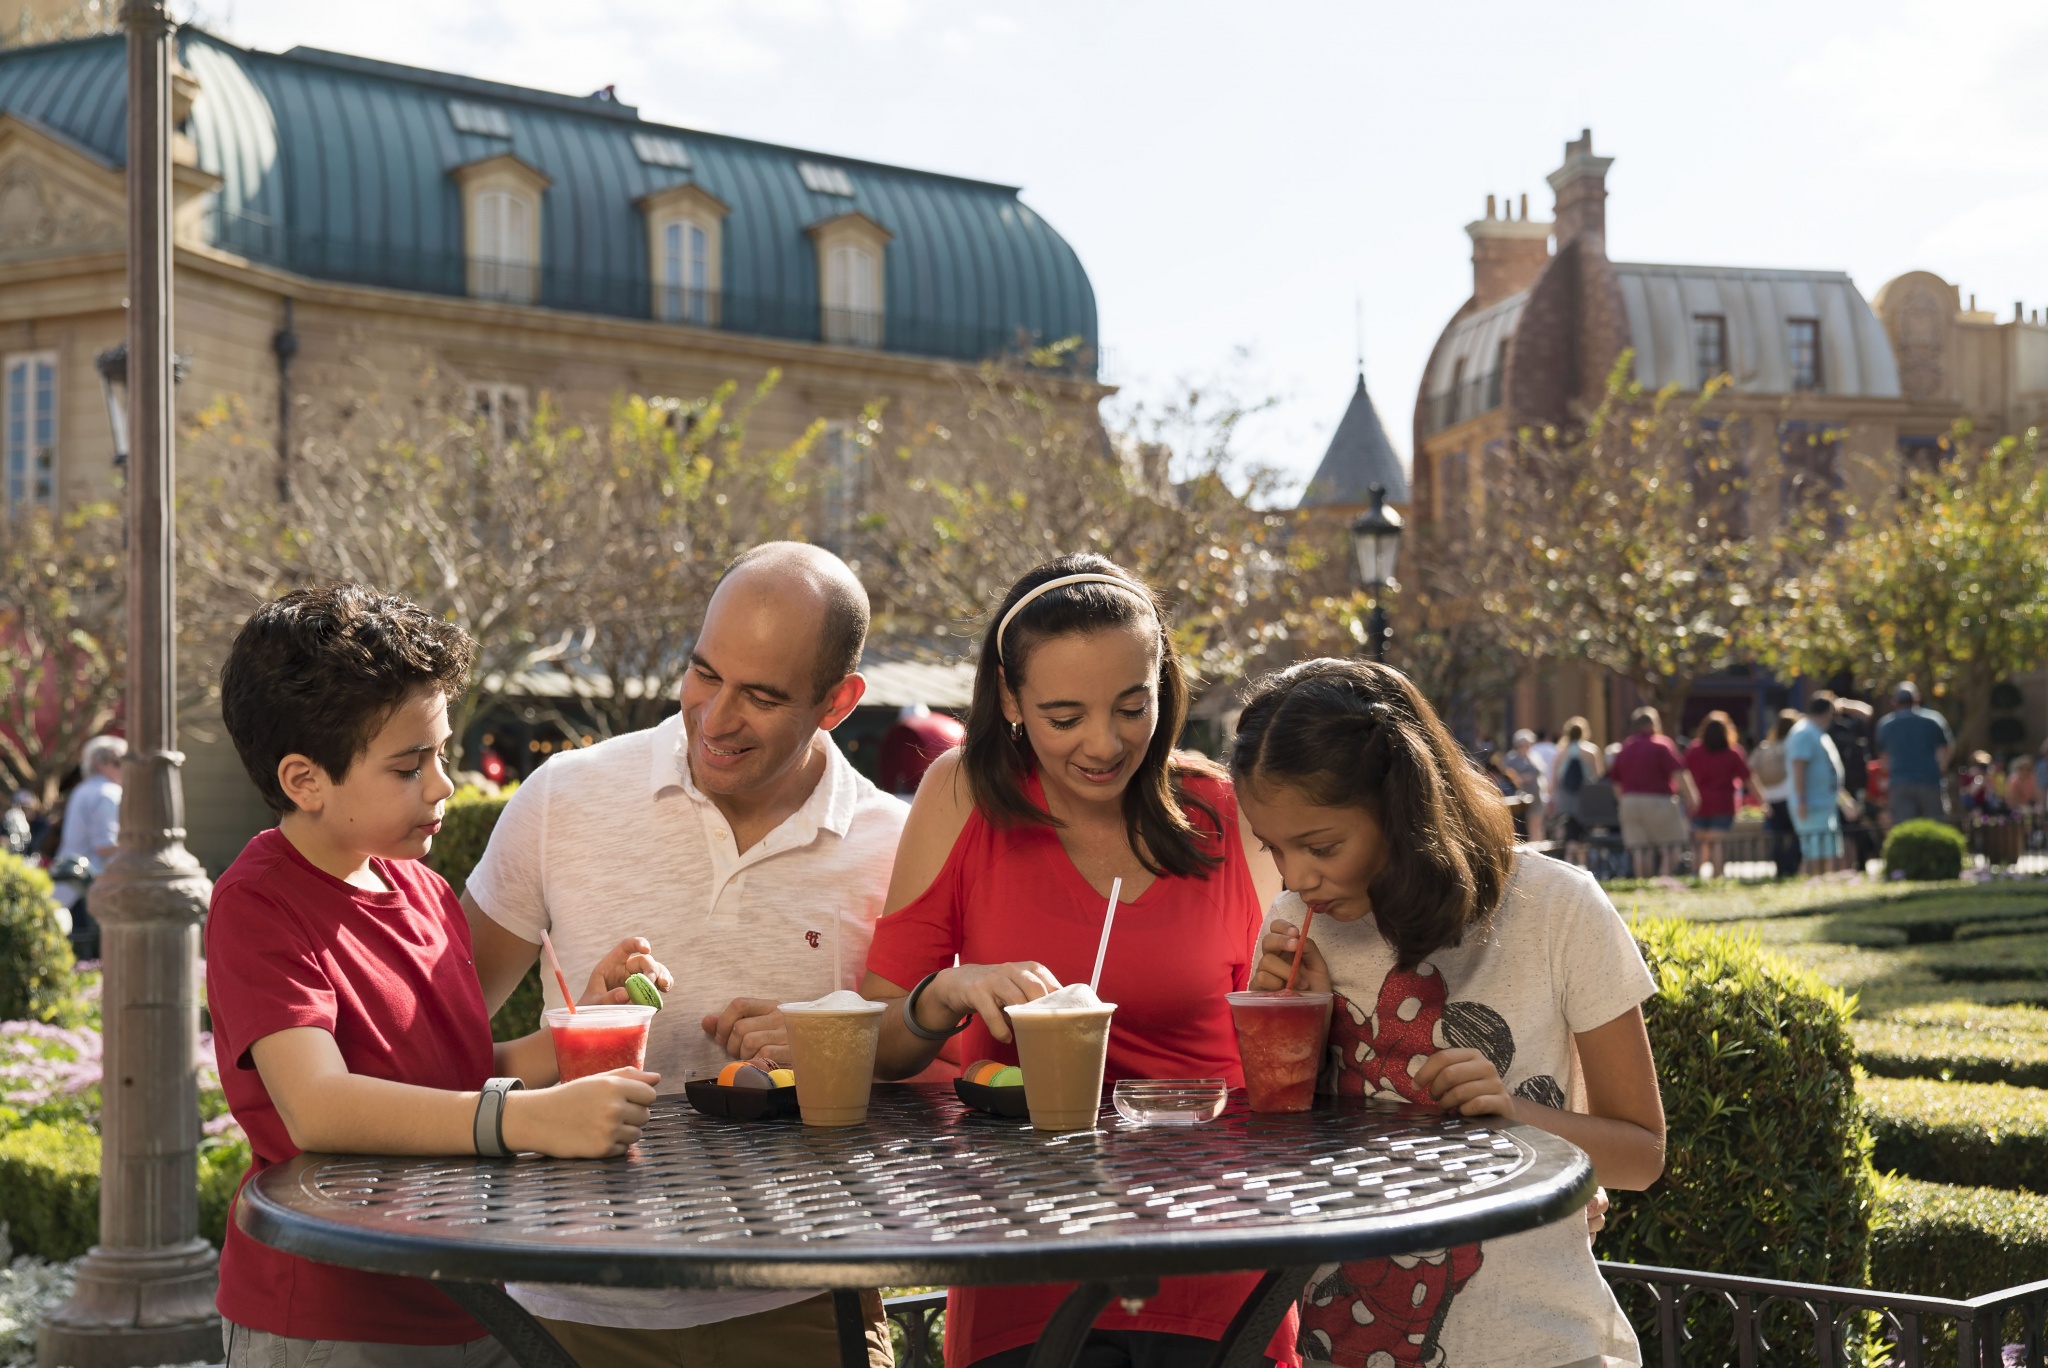 Tasting dishes from around the world at Epcot